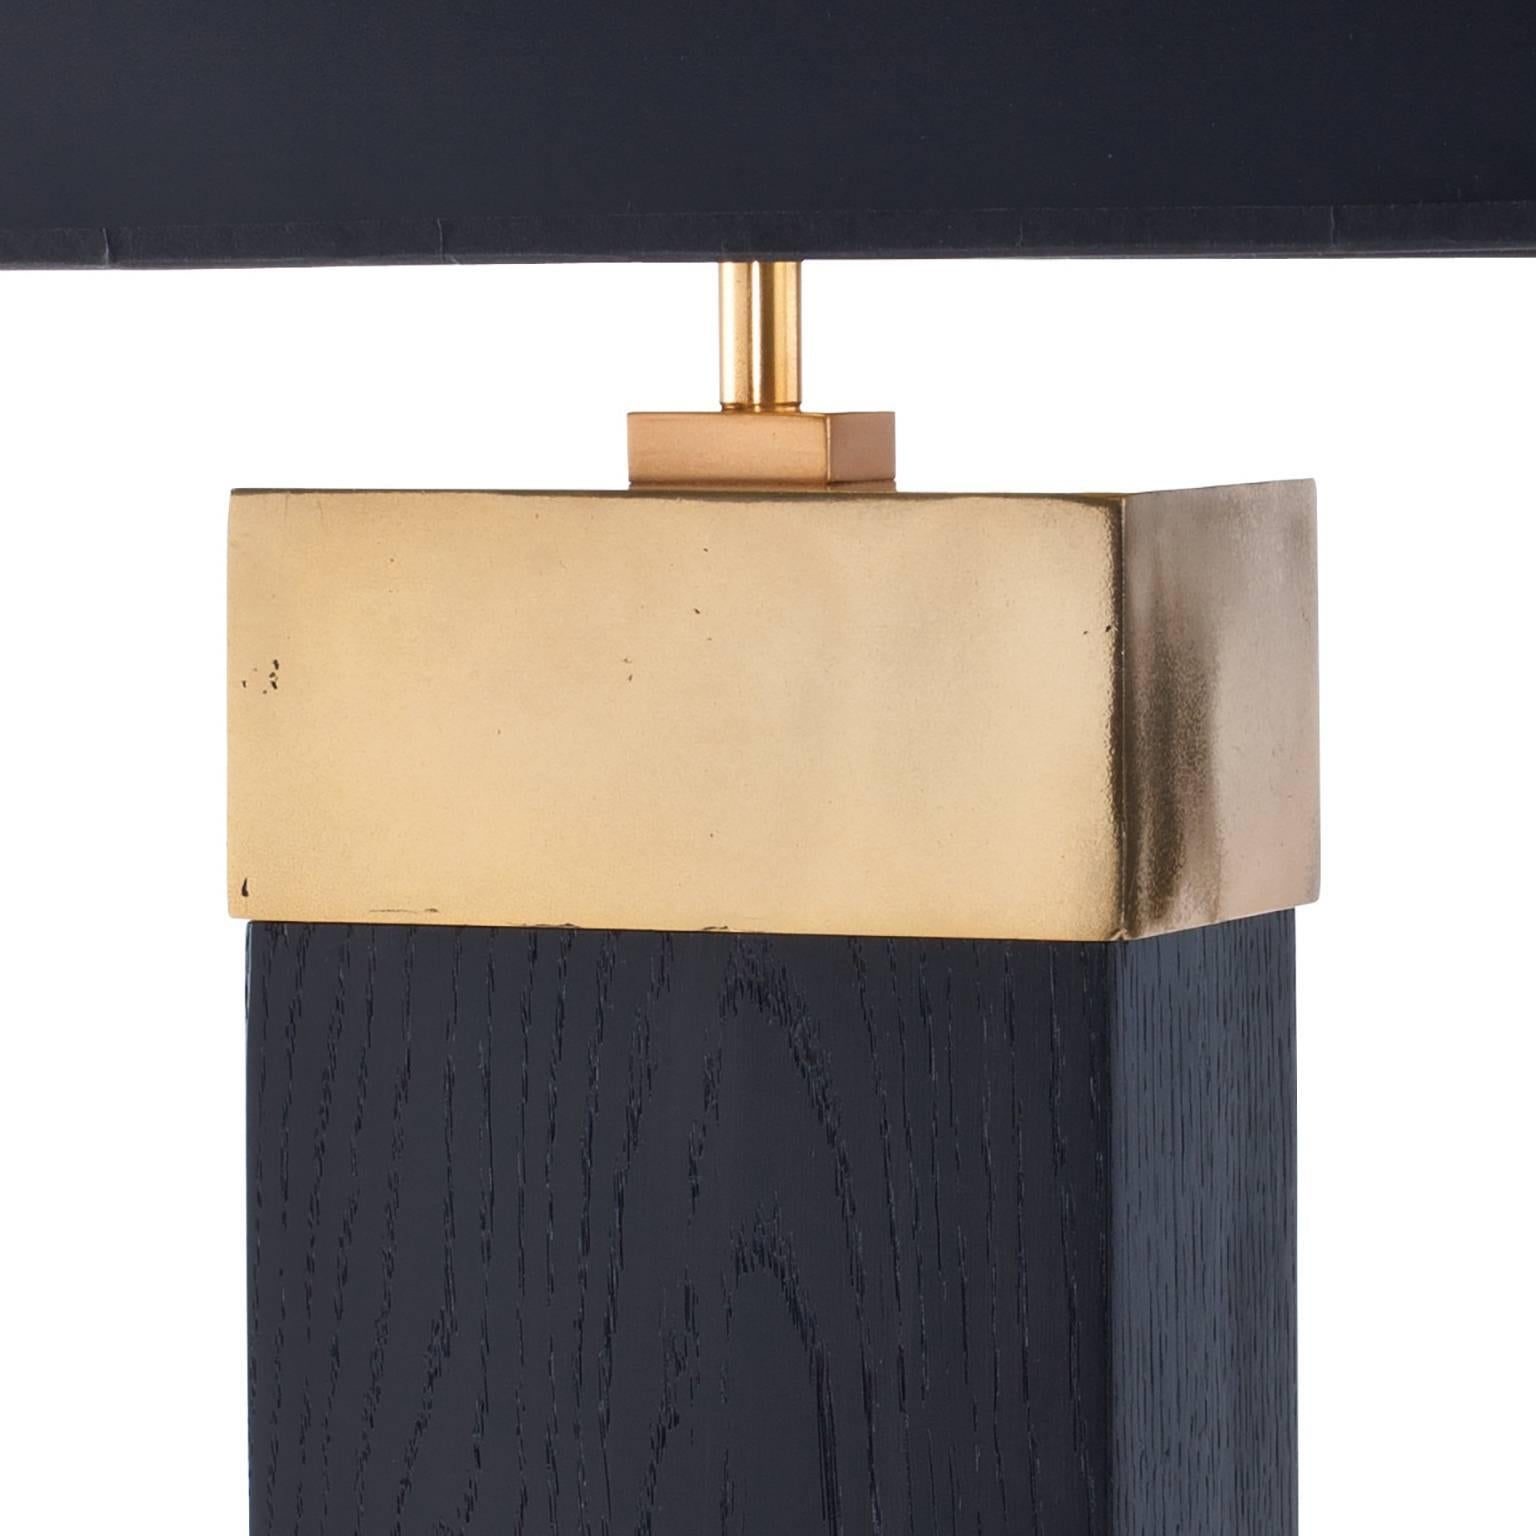 The Tribeca table lamp is shown here in an ebonized solid oak finish with a cast bronze top and bottom section finished in a gold patina. This is an elegant contemporary design that is bold in both simplicity and warmth from the selection of